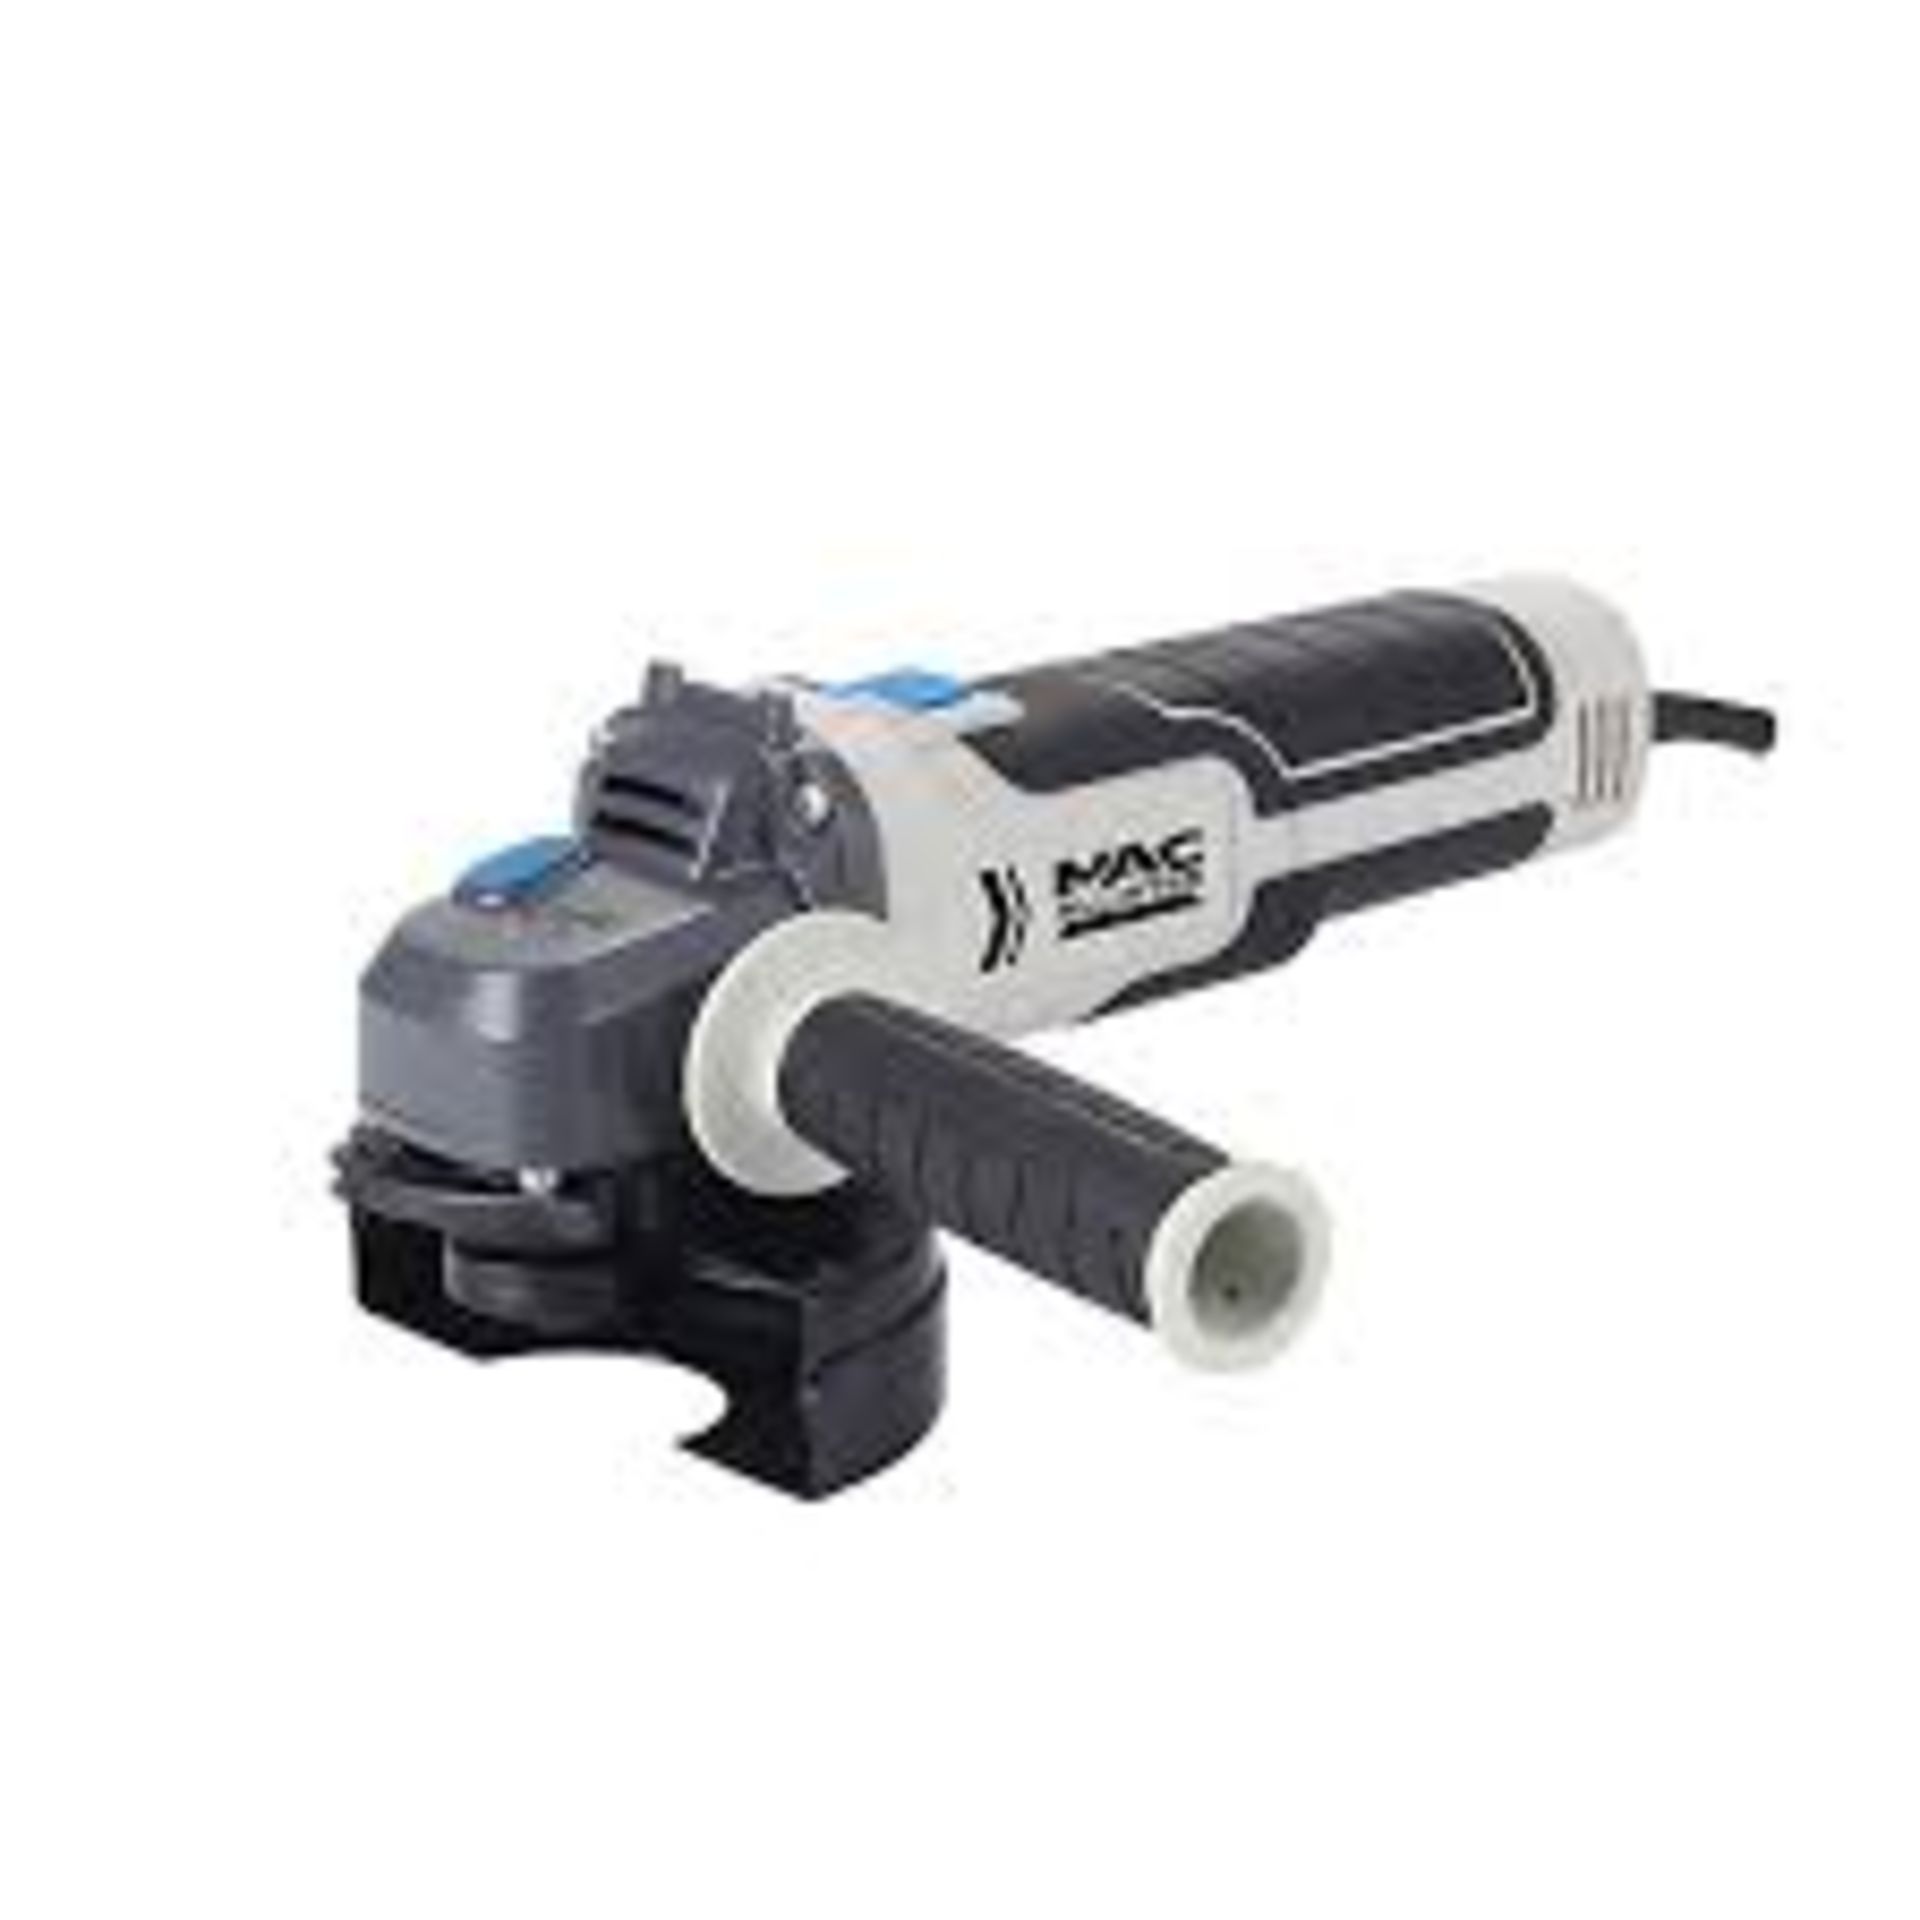 Mac Allister 750W 240V 115mm Corded Angle grinder 2525. - SR. Compact and powerful 750W Mac Allister